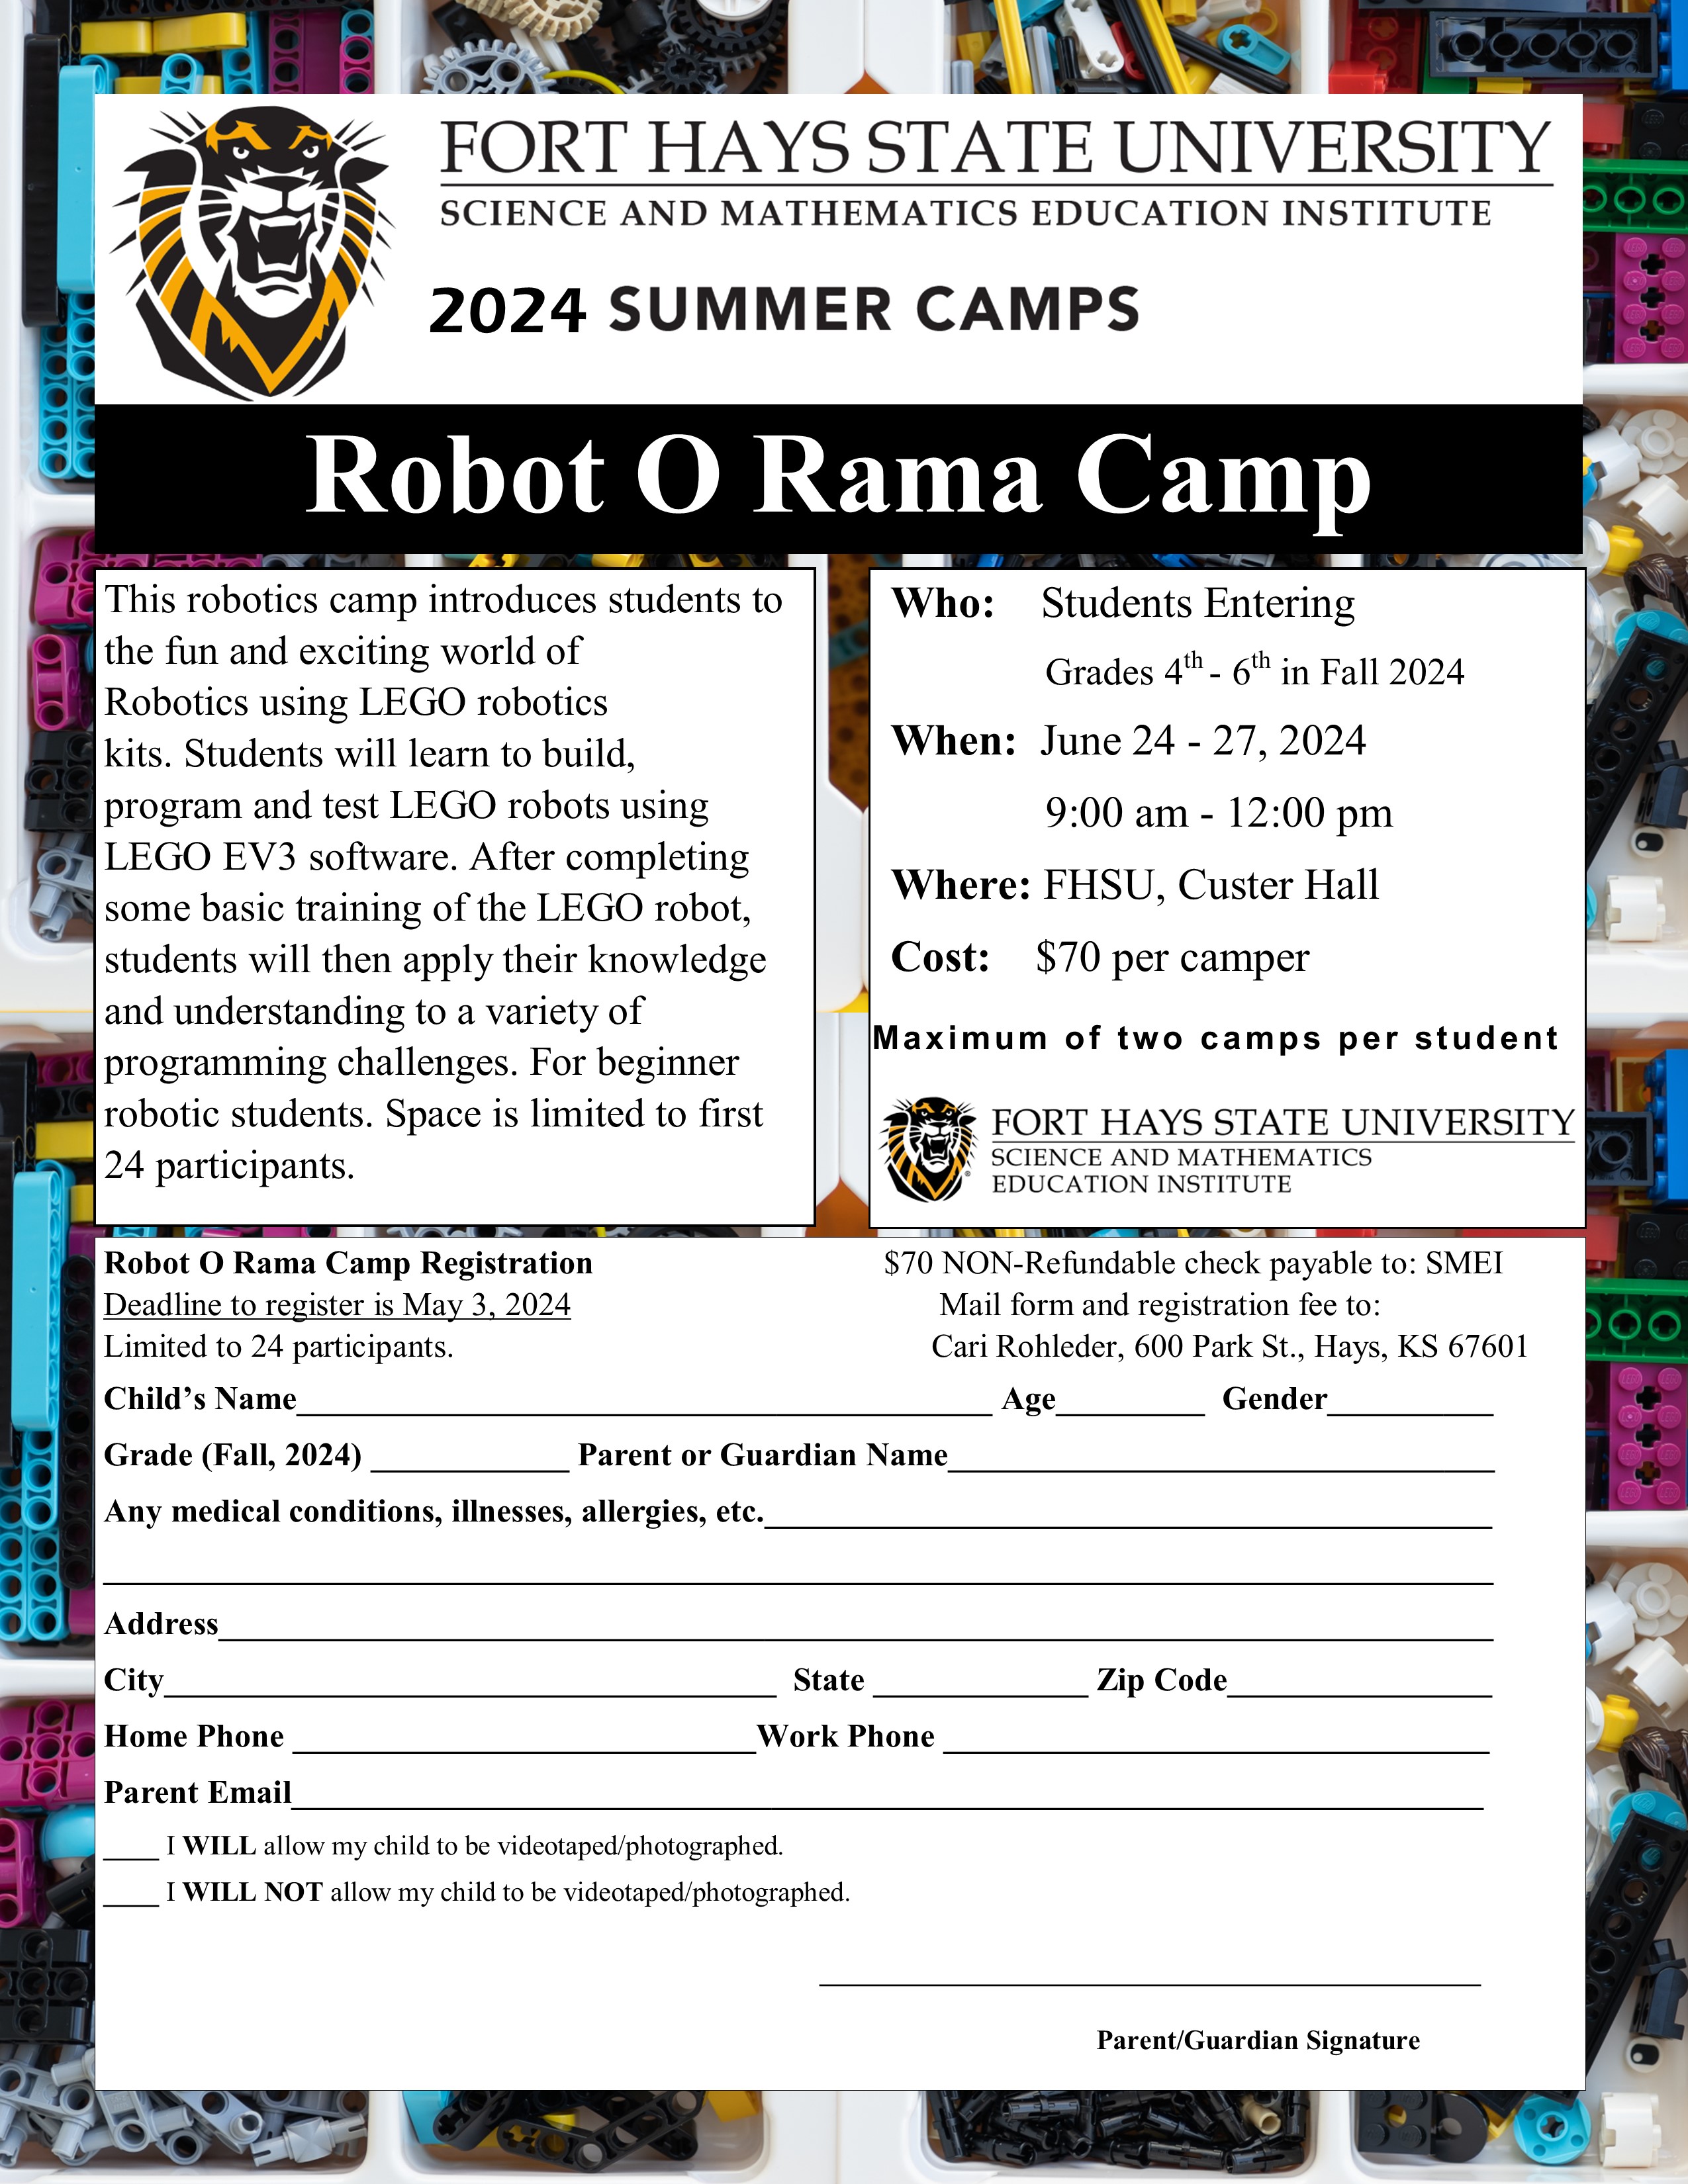 Science and Mathematics Education Institute Summer Camps Fort Hays